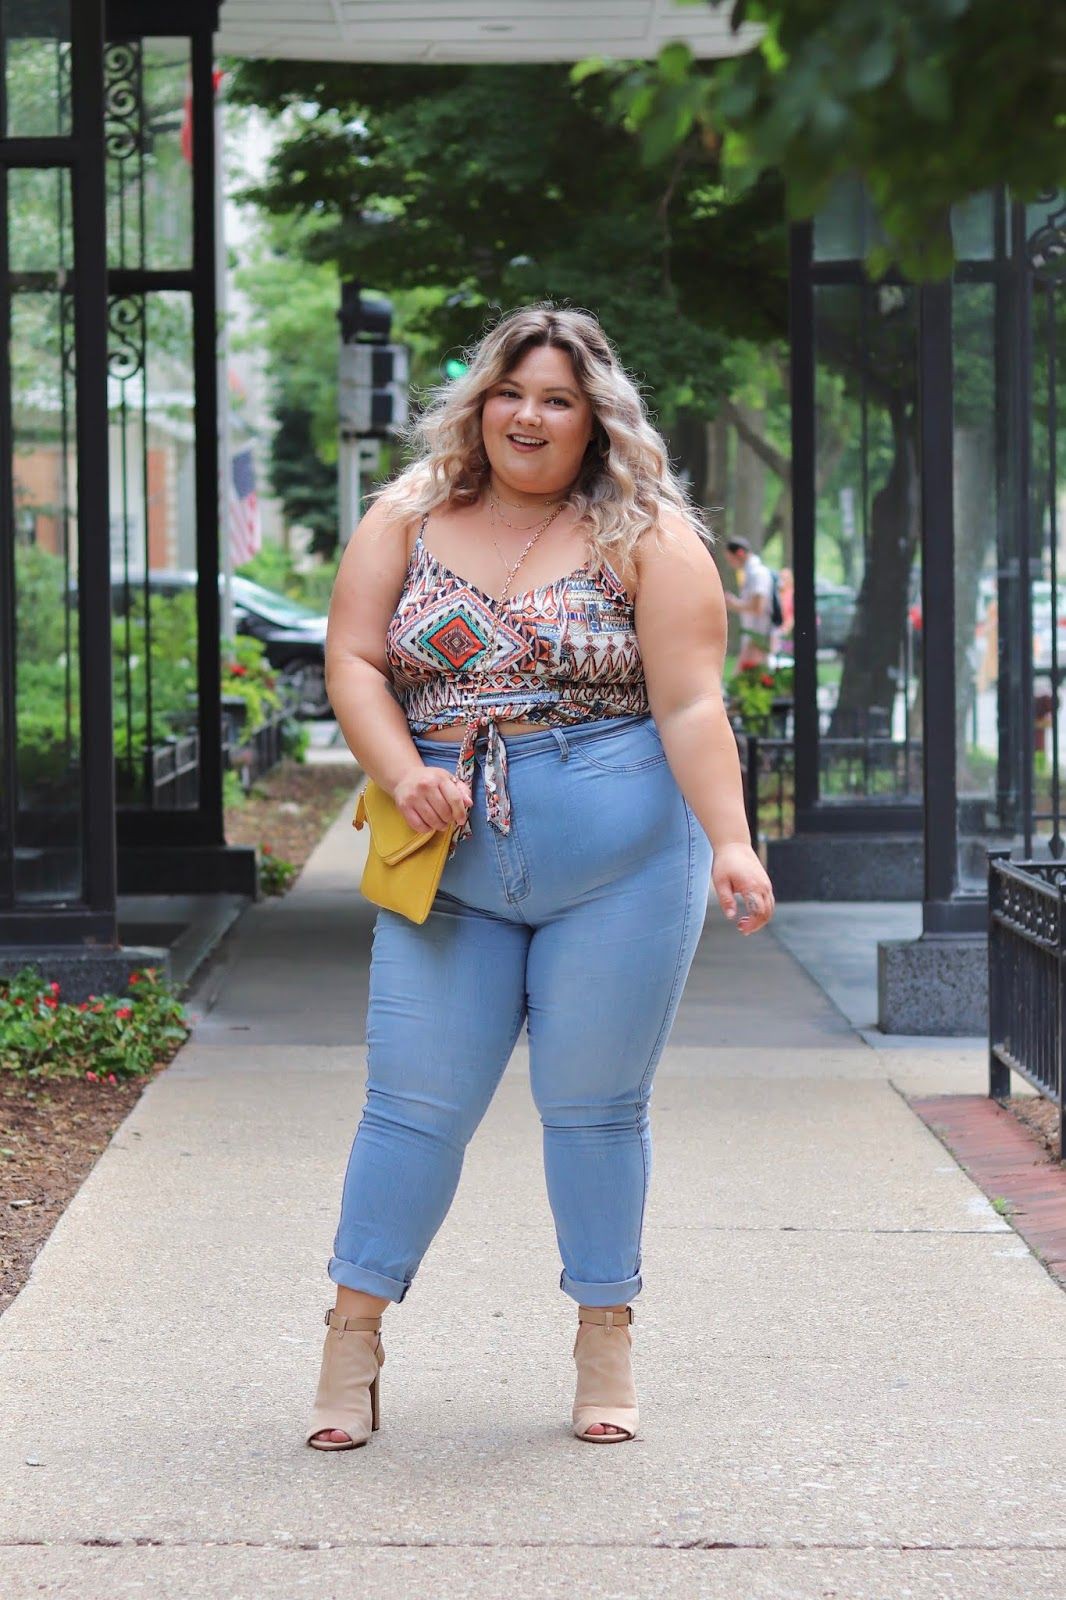 Crop Top Outfits Curvy Girl: Plus size outfit,  Petite size,  fashion blogger,  Fashion Nova,  Crop Top Outfits  